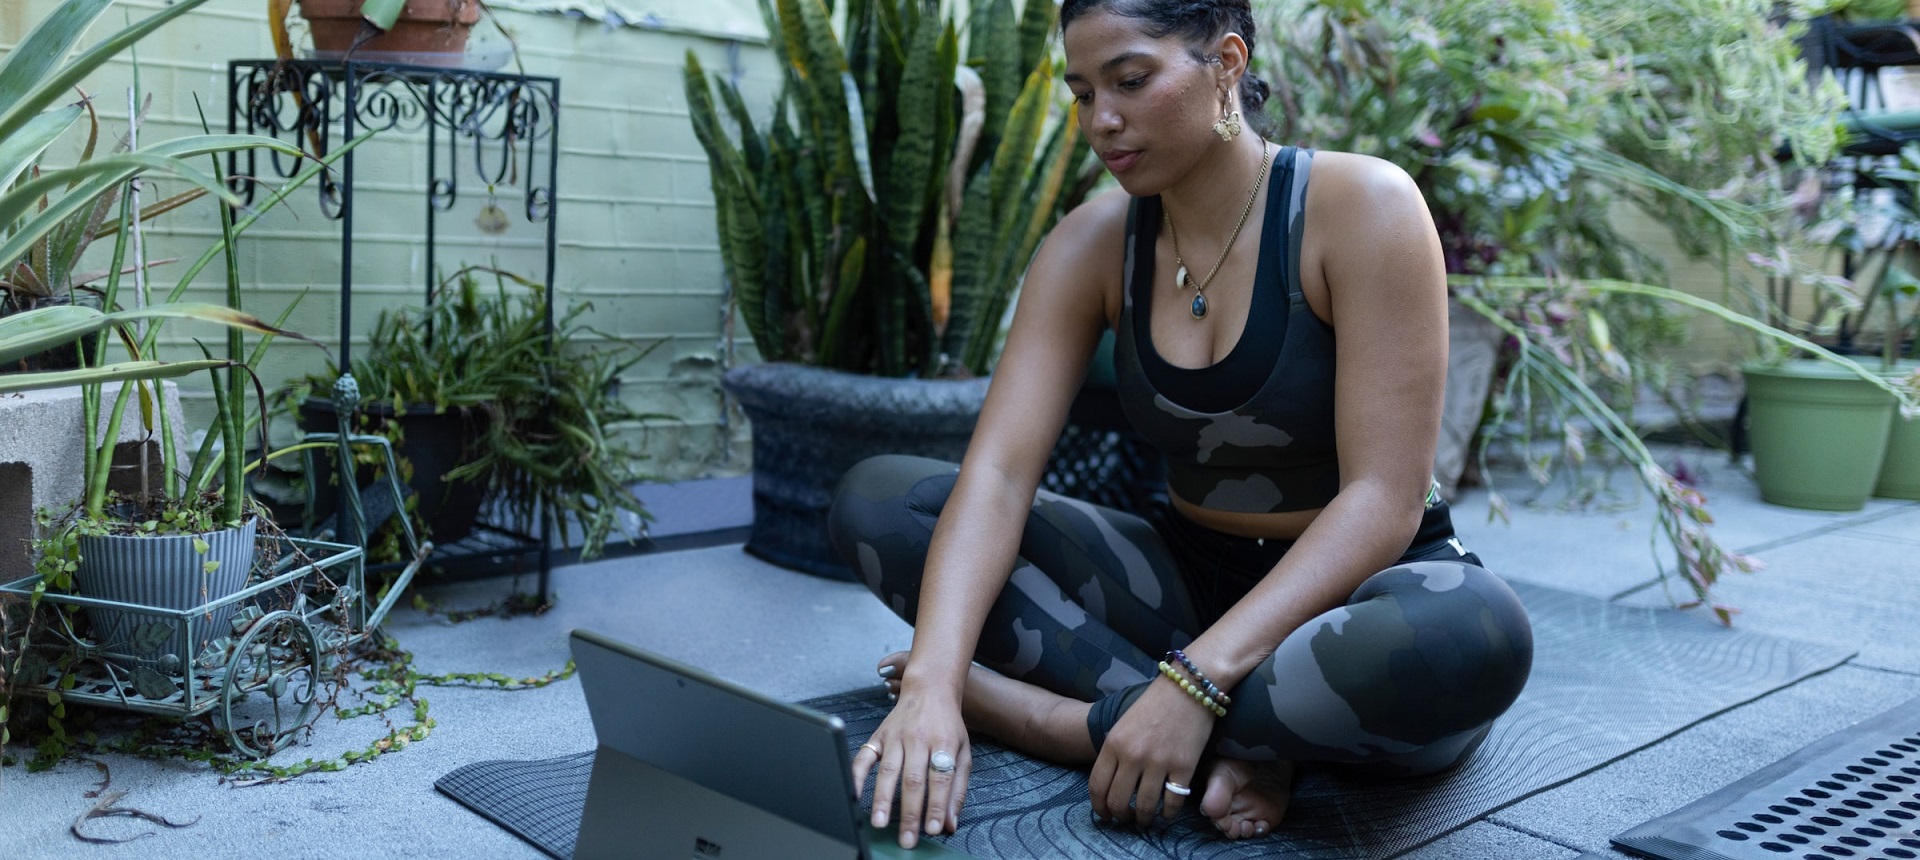 Woman working at a laptop outdoors, on a deck surrounded by plants